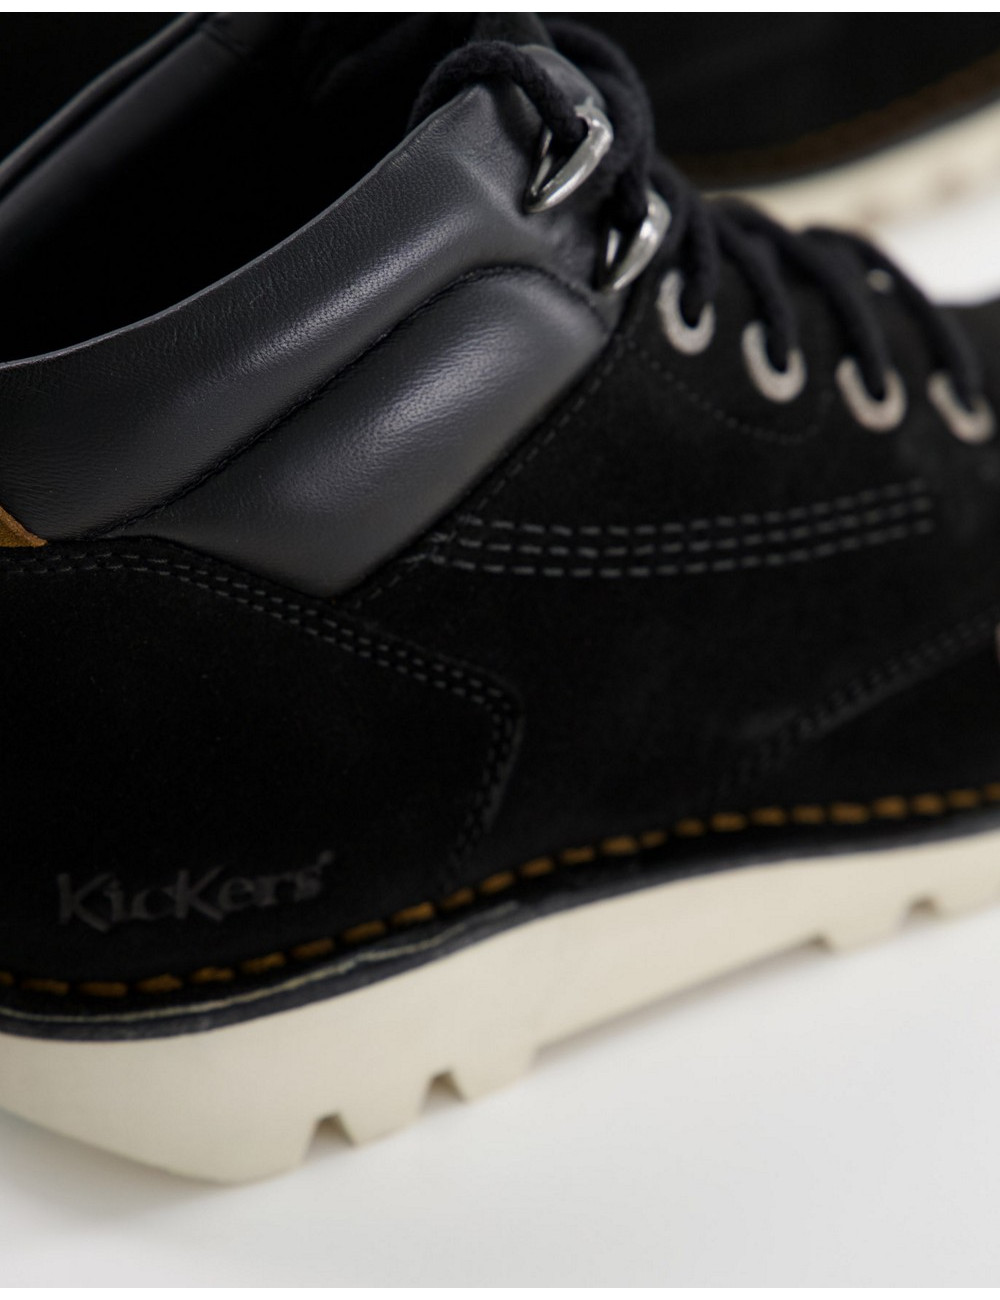 Kickerskick rover lace up...